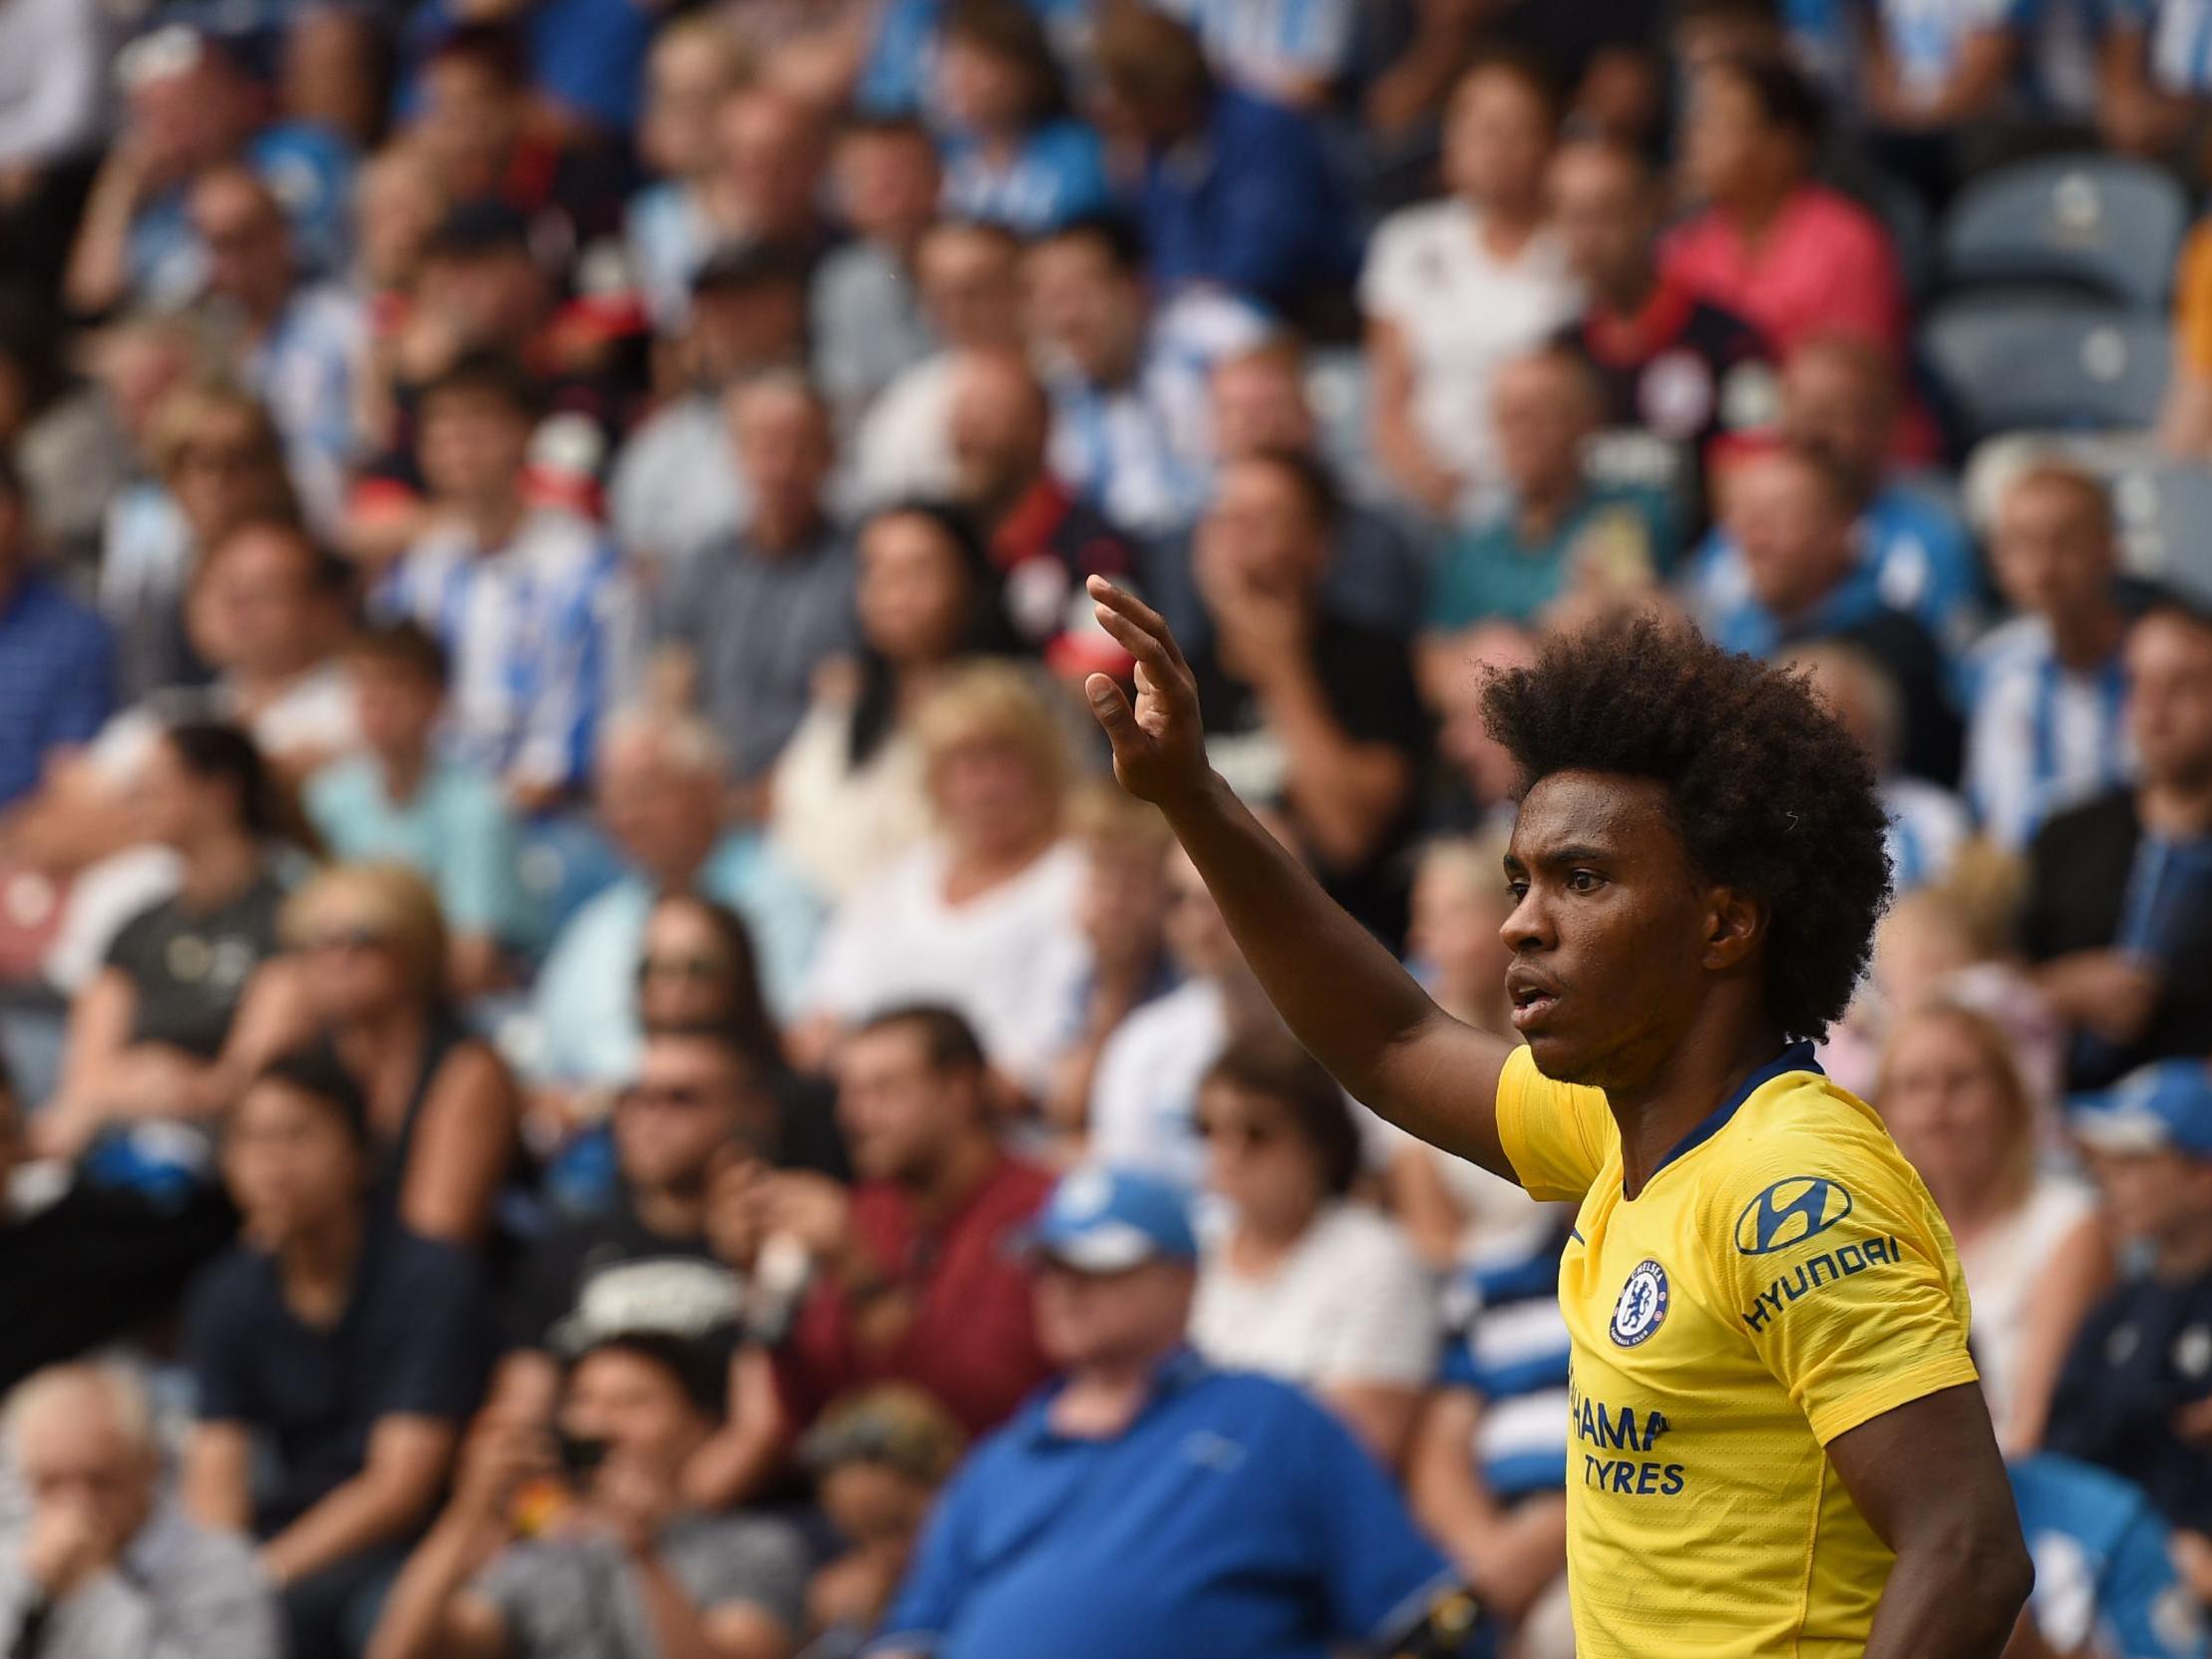 It has been widely reported that Willian was one of a number of key Chelsea players whose relationship with Conte deteriorated last season